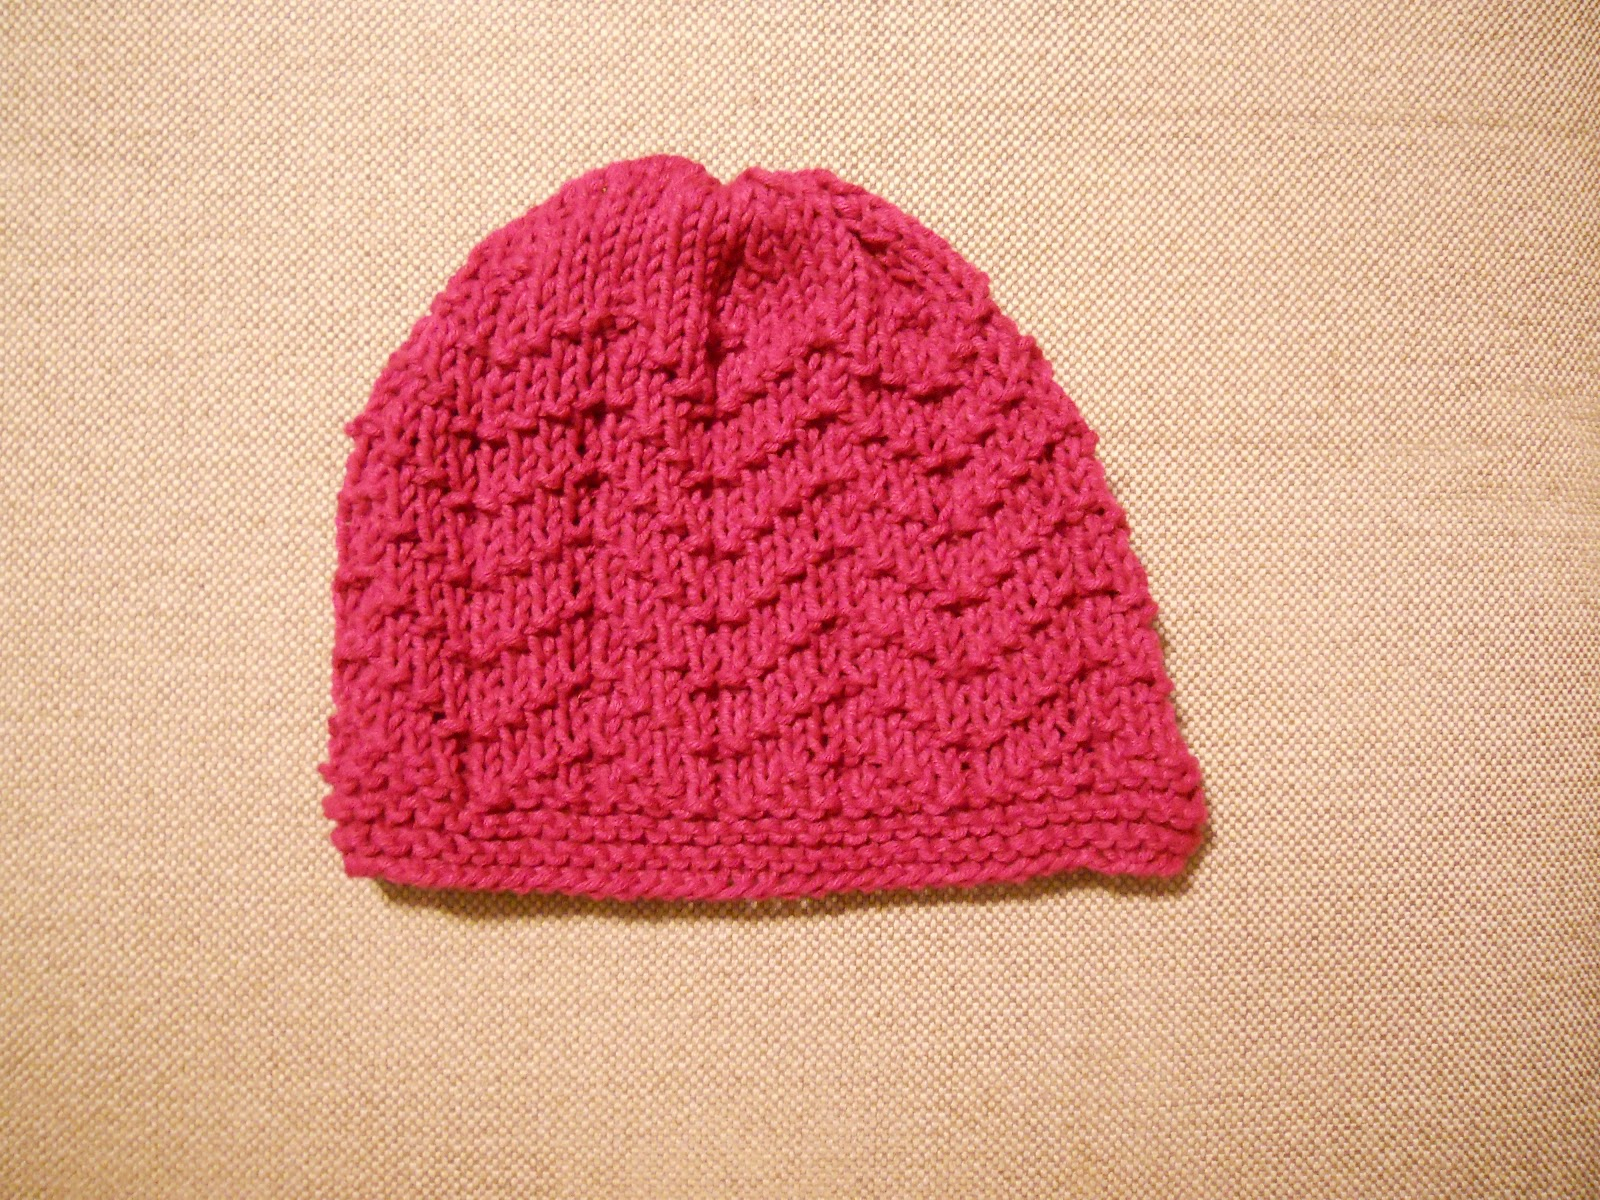 Knit Cap Patterns Knitting With Schnapps Introducing The Point Of Hope Reversible